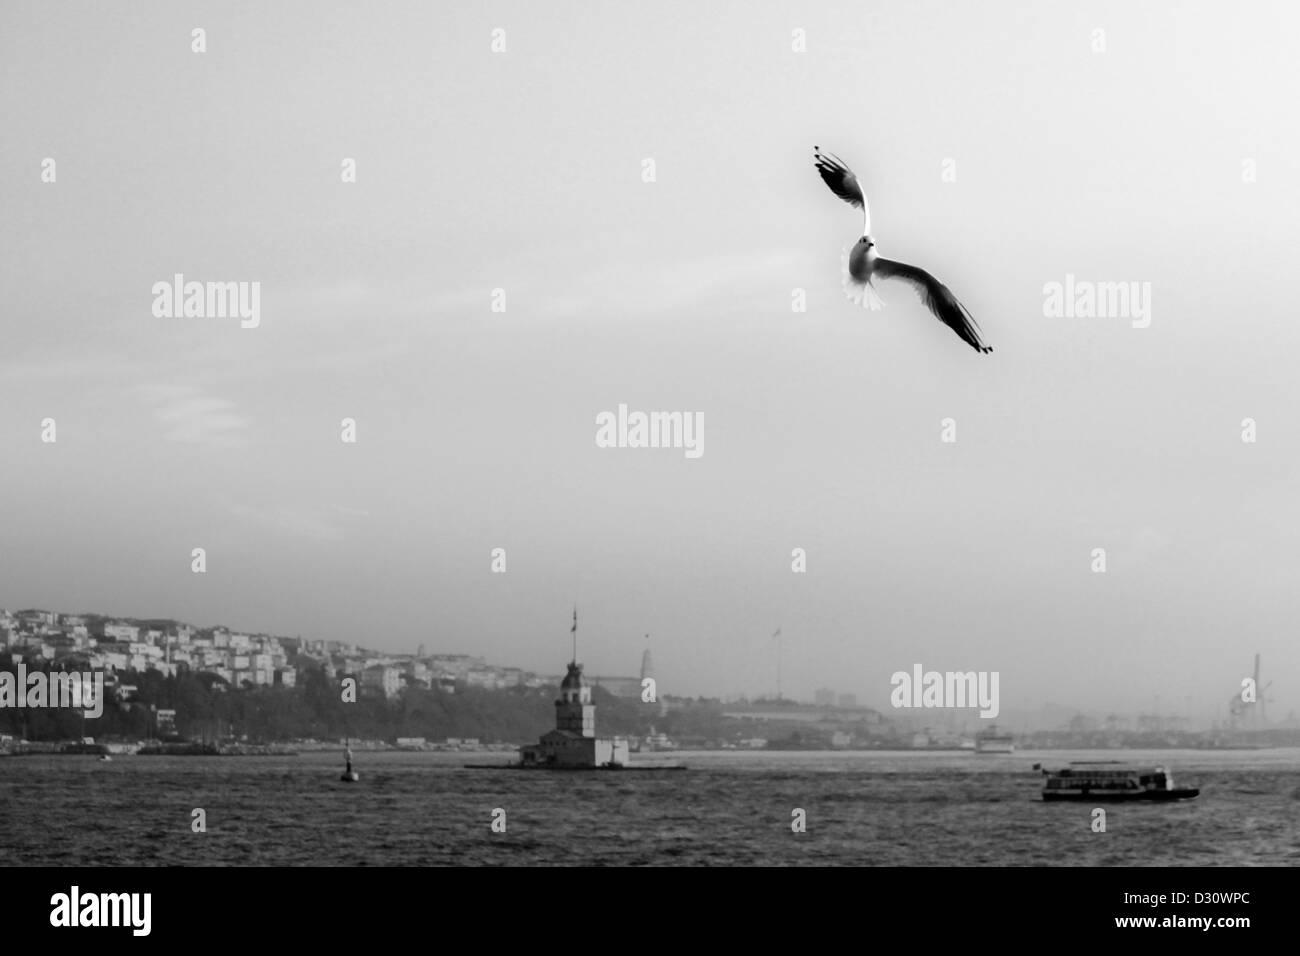 ISTANBUL TURKEY - Seagull flying over Maiden's Tower sits on a small islet off the coast of Uskudar, Bosphorus strait Stock Photo